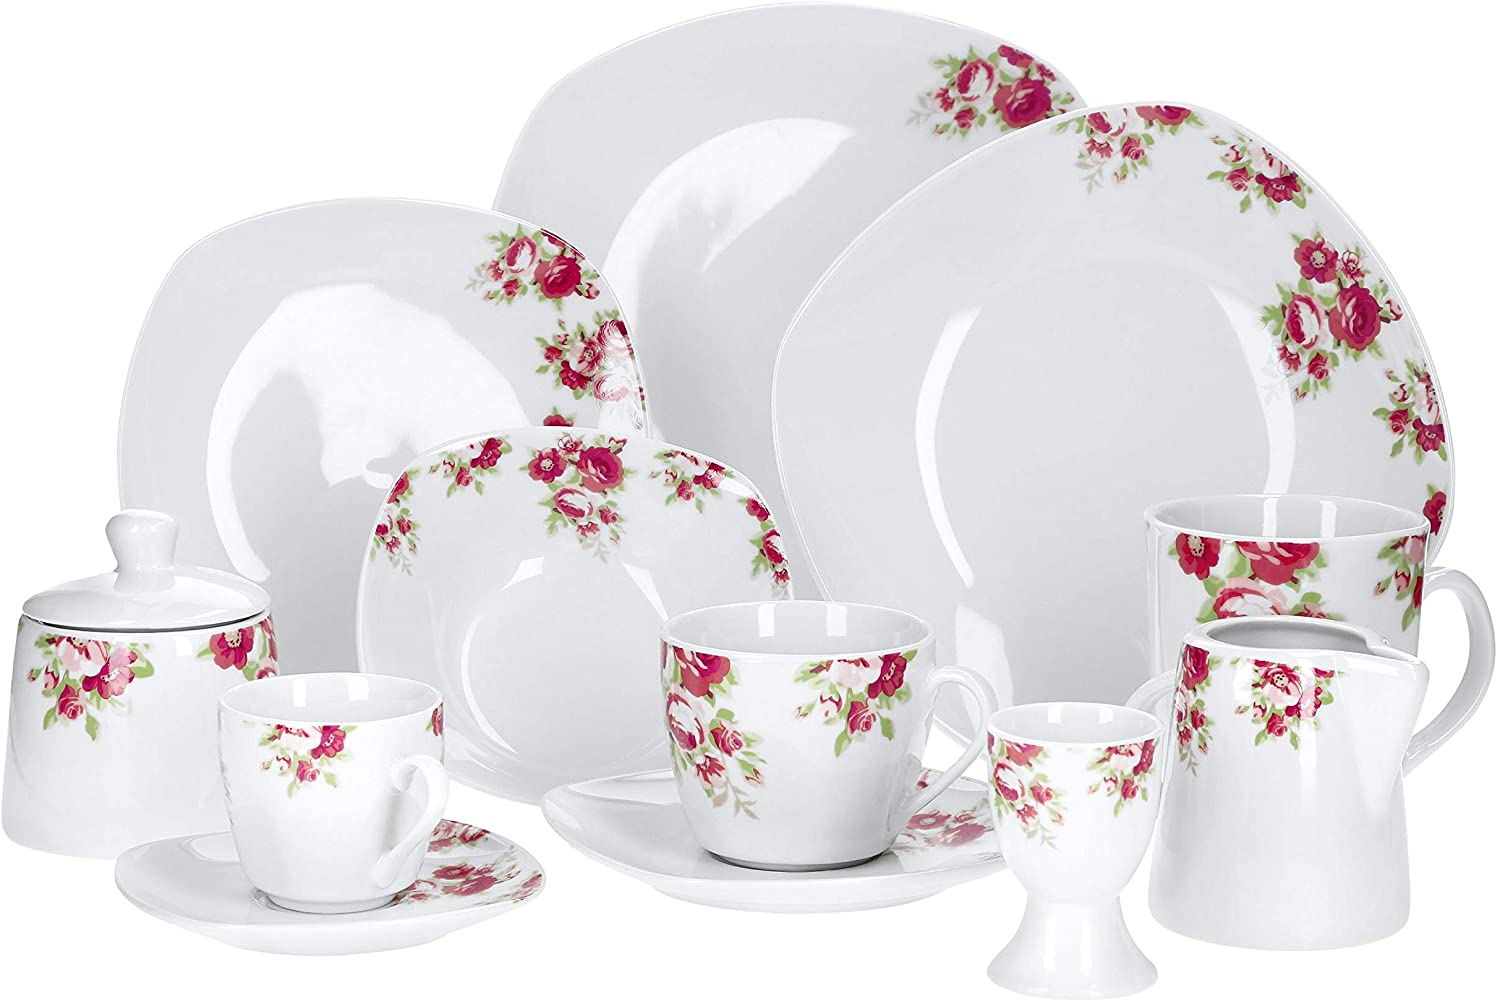 Van Well 62-TLG. Rosentraum I Dinner Service Festive Tableware 6 Pers. Plate set, coffee table and accessories, fine porcelain, gastro quality.